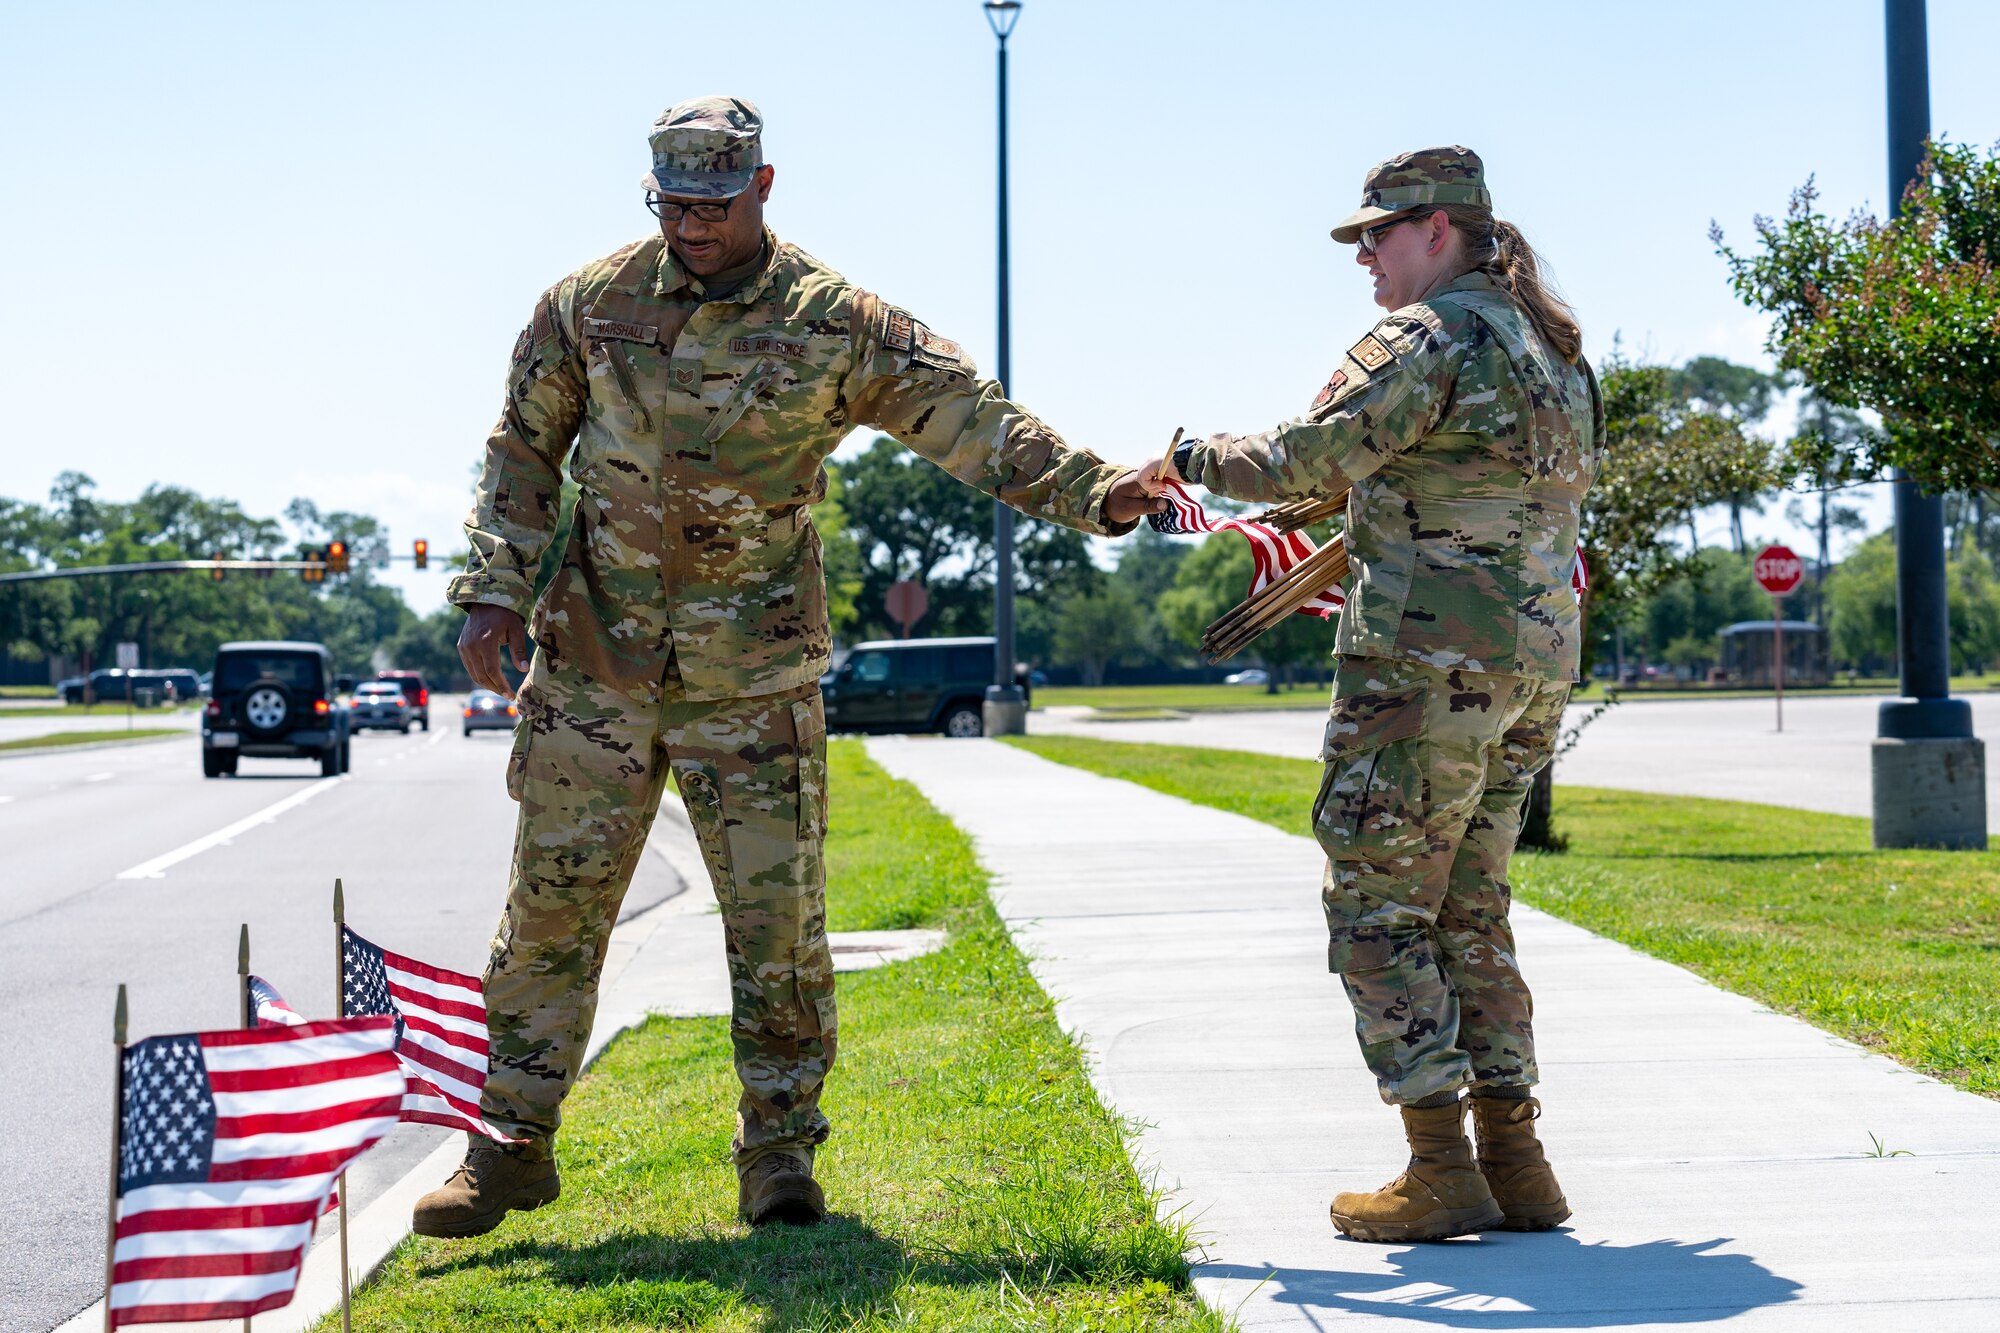 U.S. Air Force Tech. Sgt. Anthony Marshall, 81st Civil Engineer Squadron chief of health and safety, and Airman 1st Class Liberty Barrett, 81st Operational Medical Readiness Squadron medical technician, place flags at Keesler Air Force Base, Mississippi, June 12, 2023.